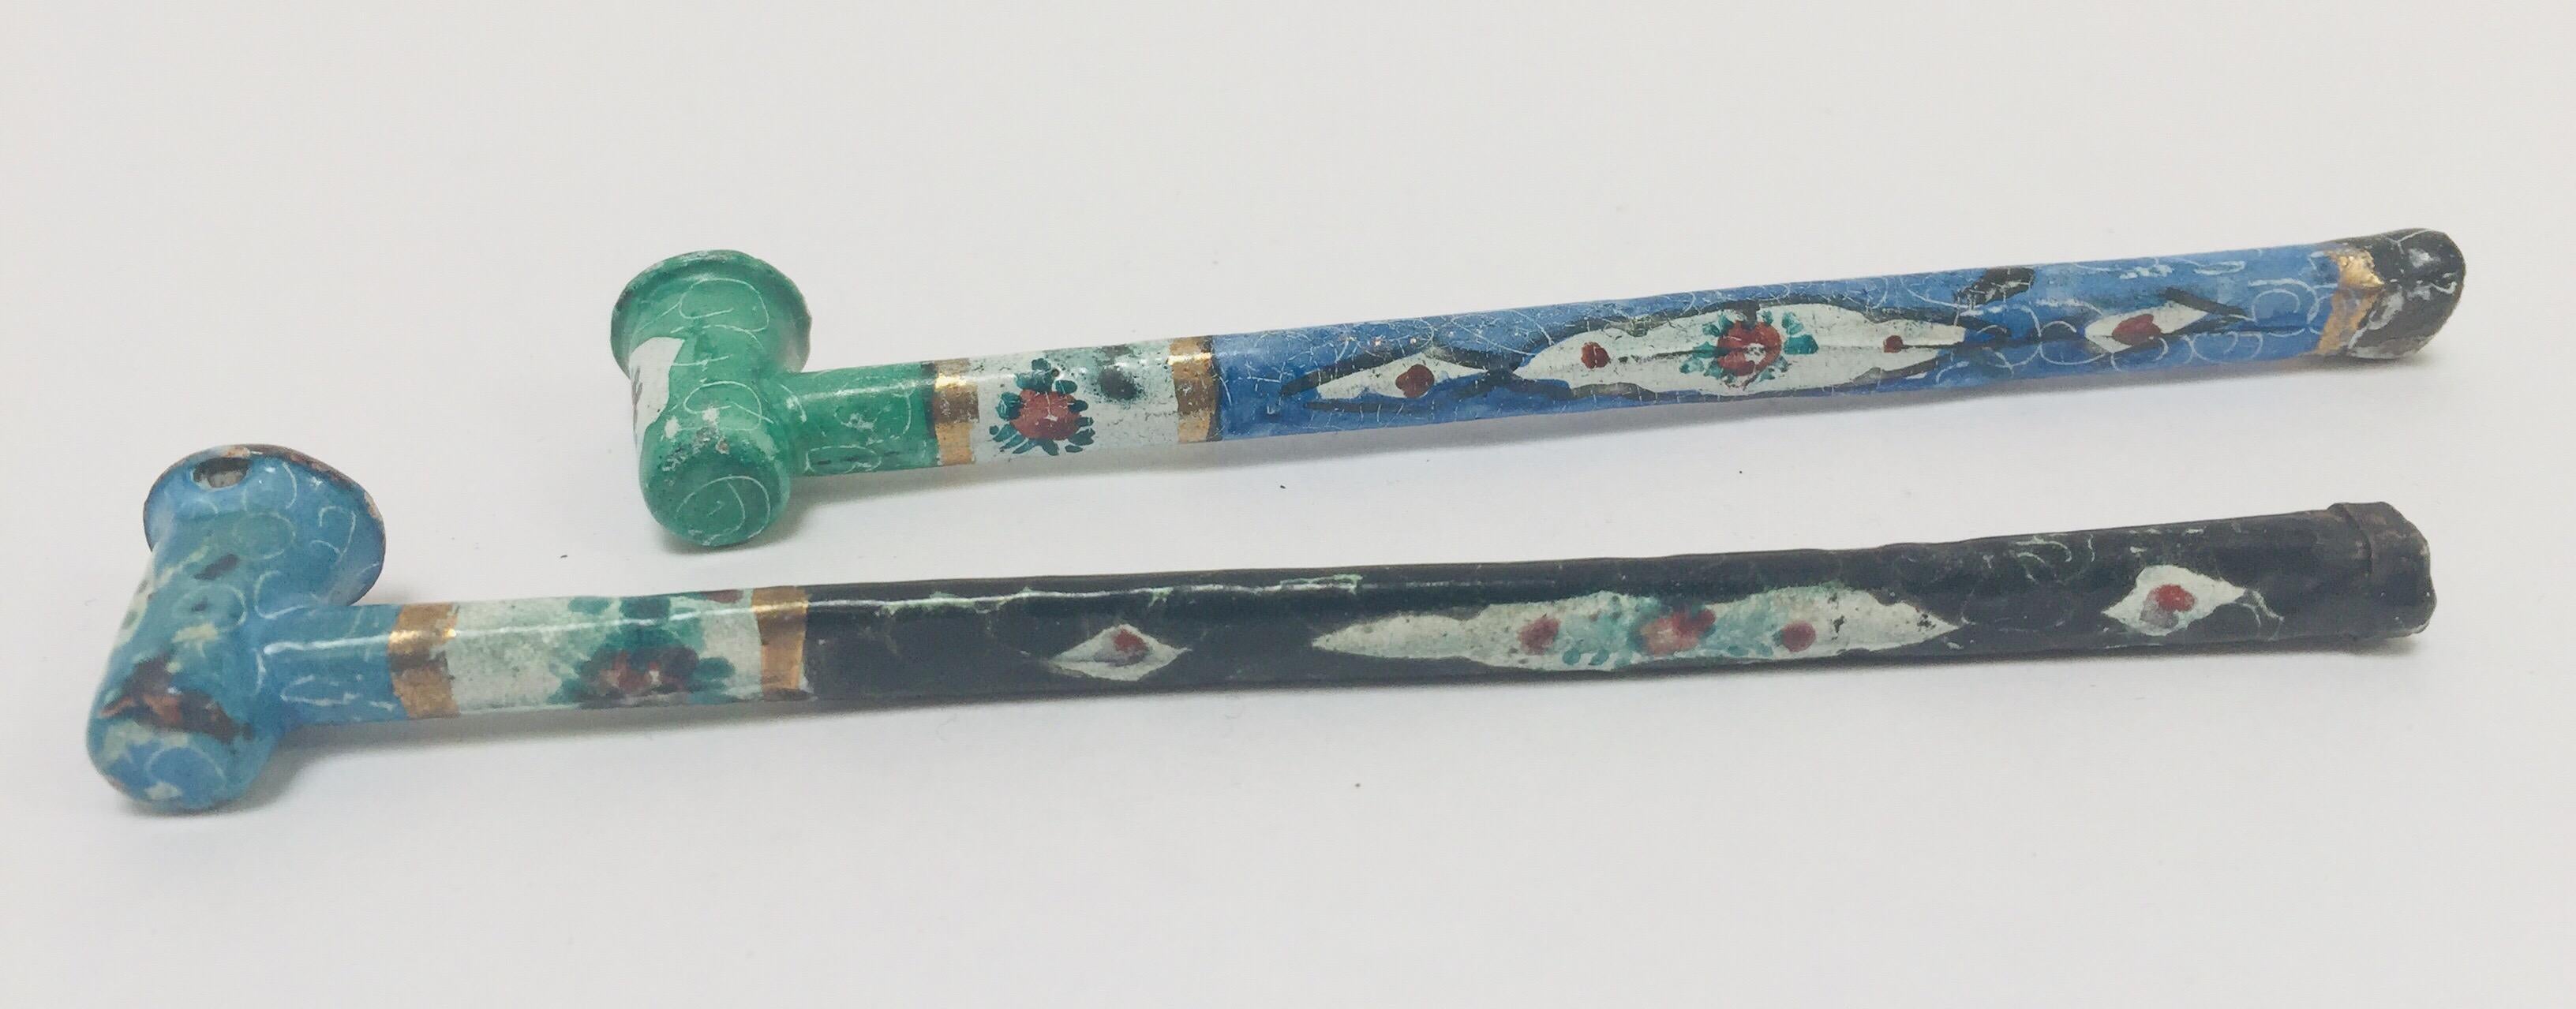 opium pipe for sale